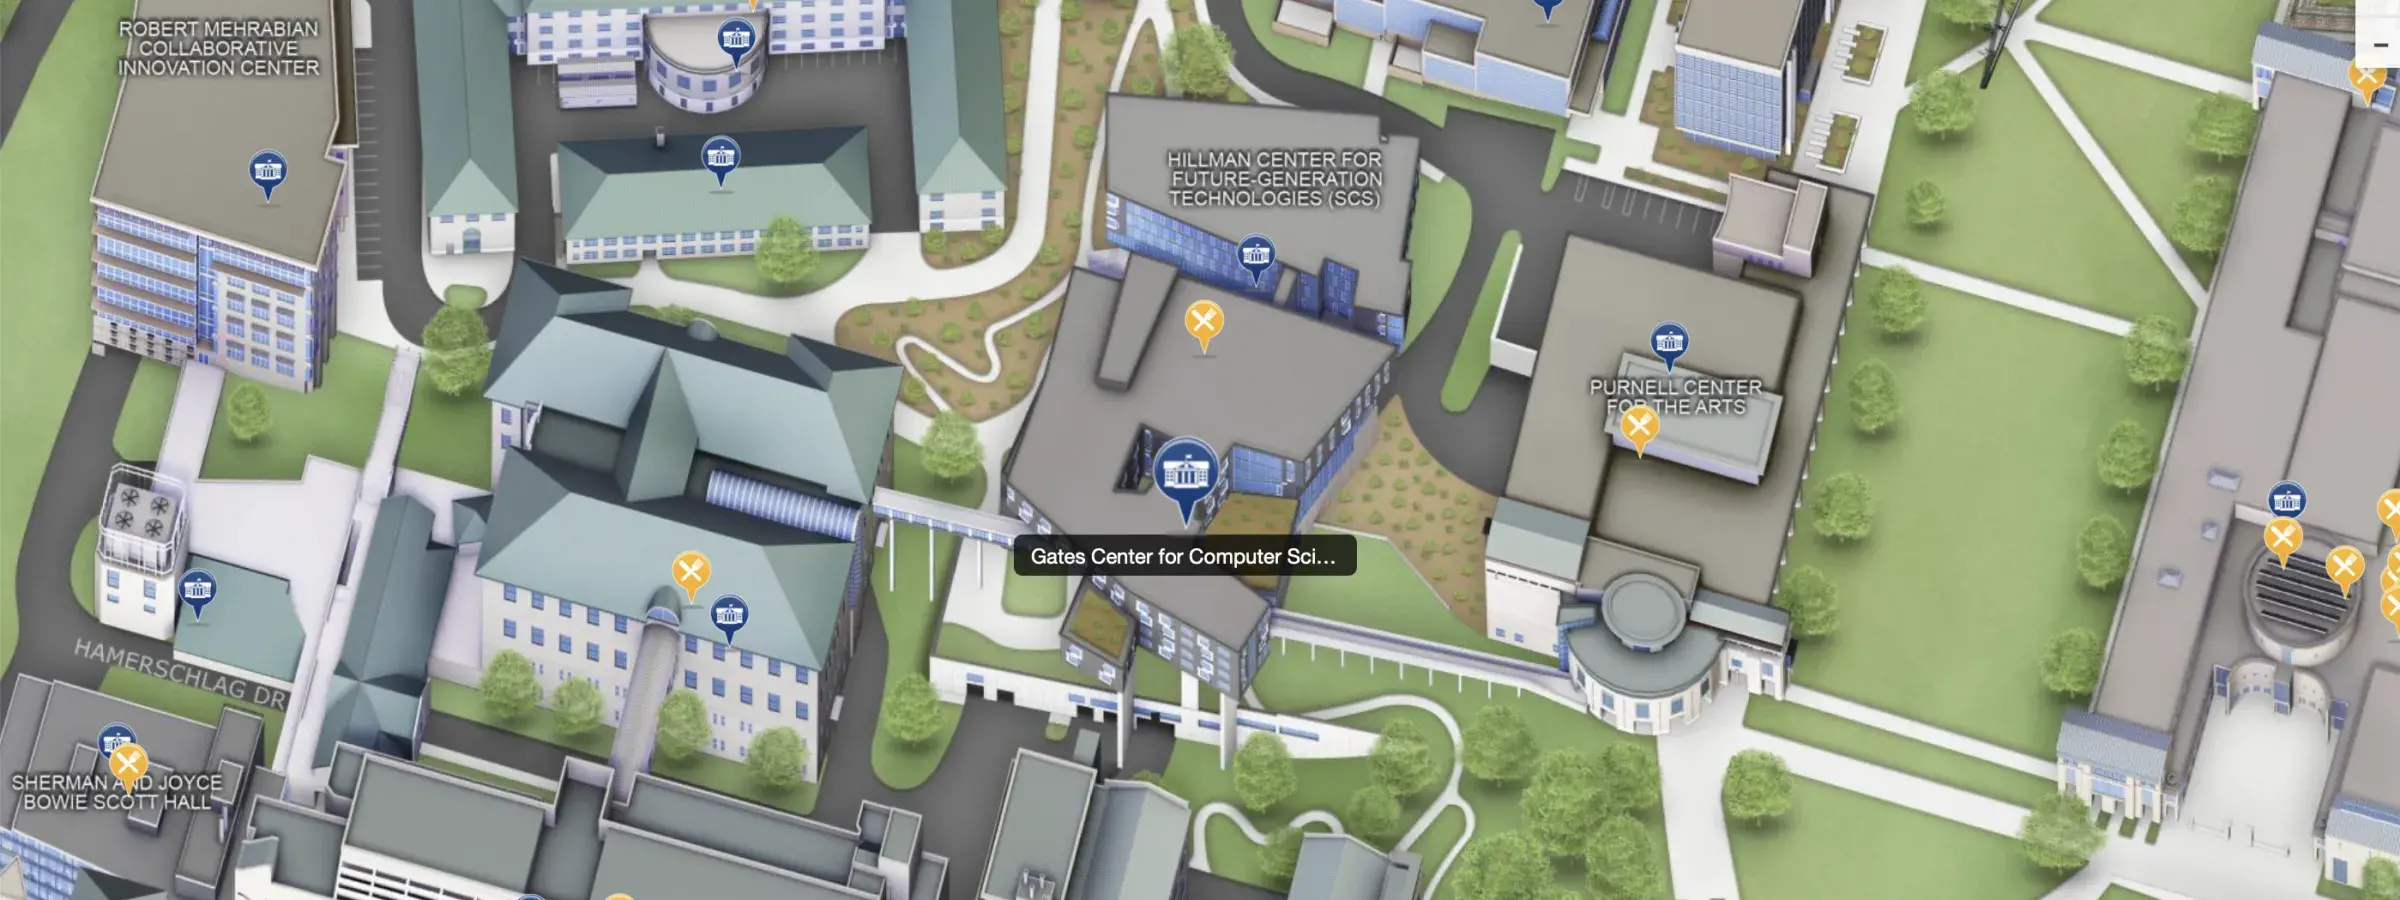 Bird's eye map view of Gates Center for Computer Science